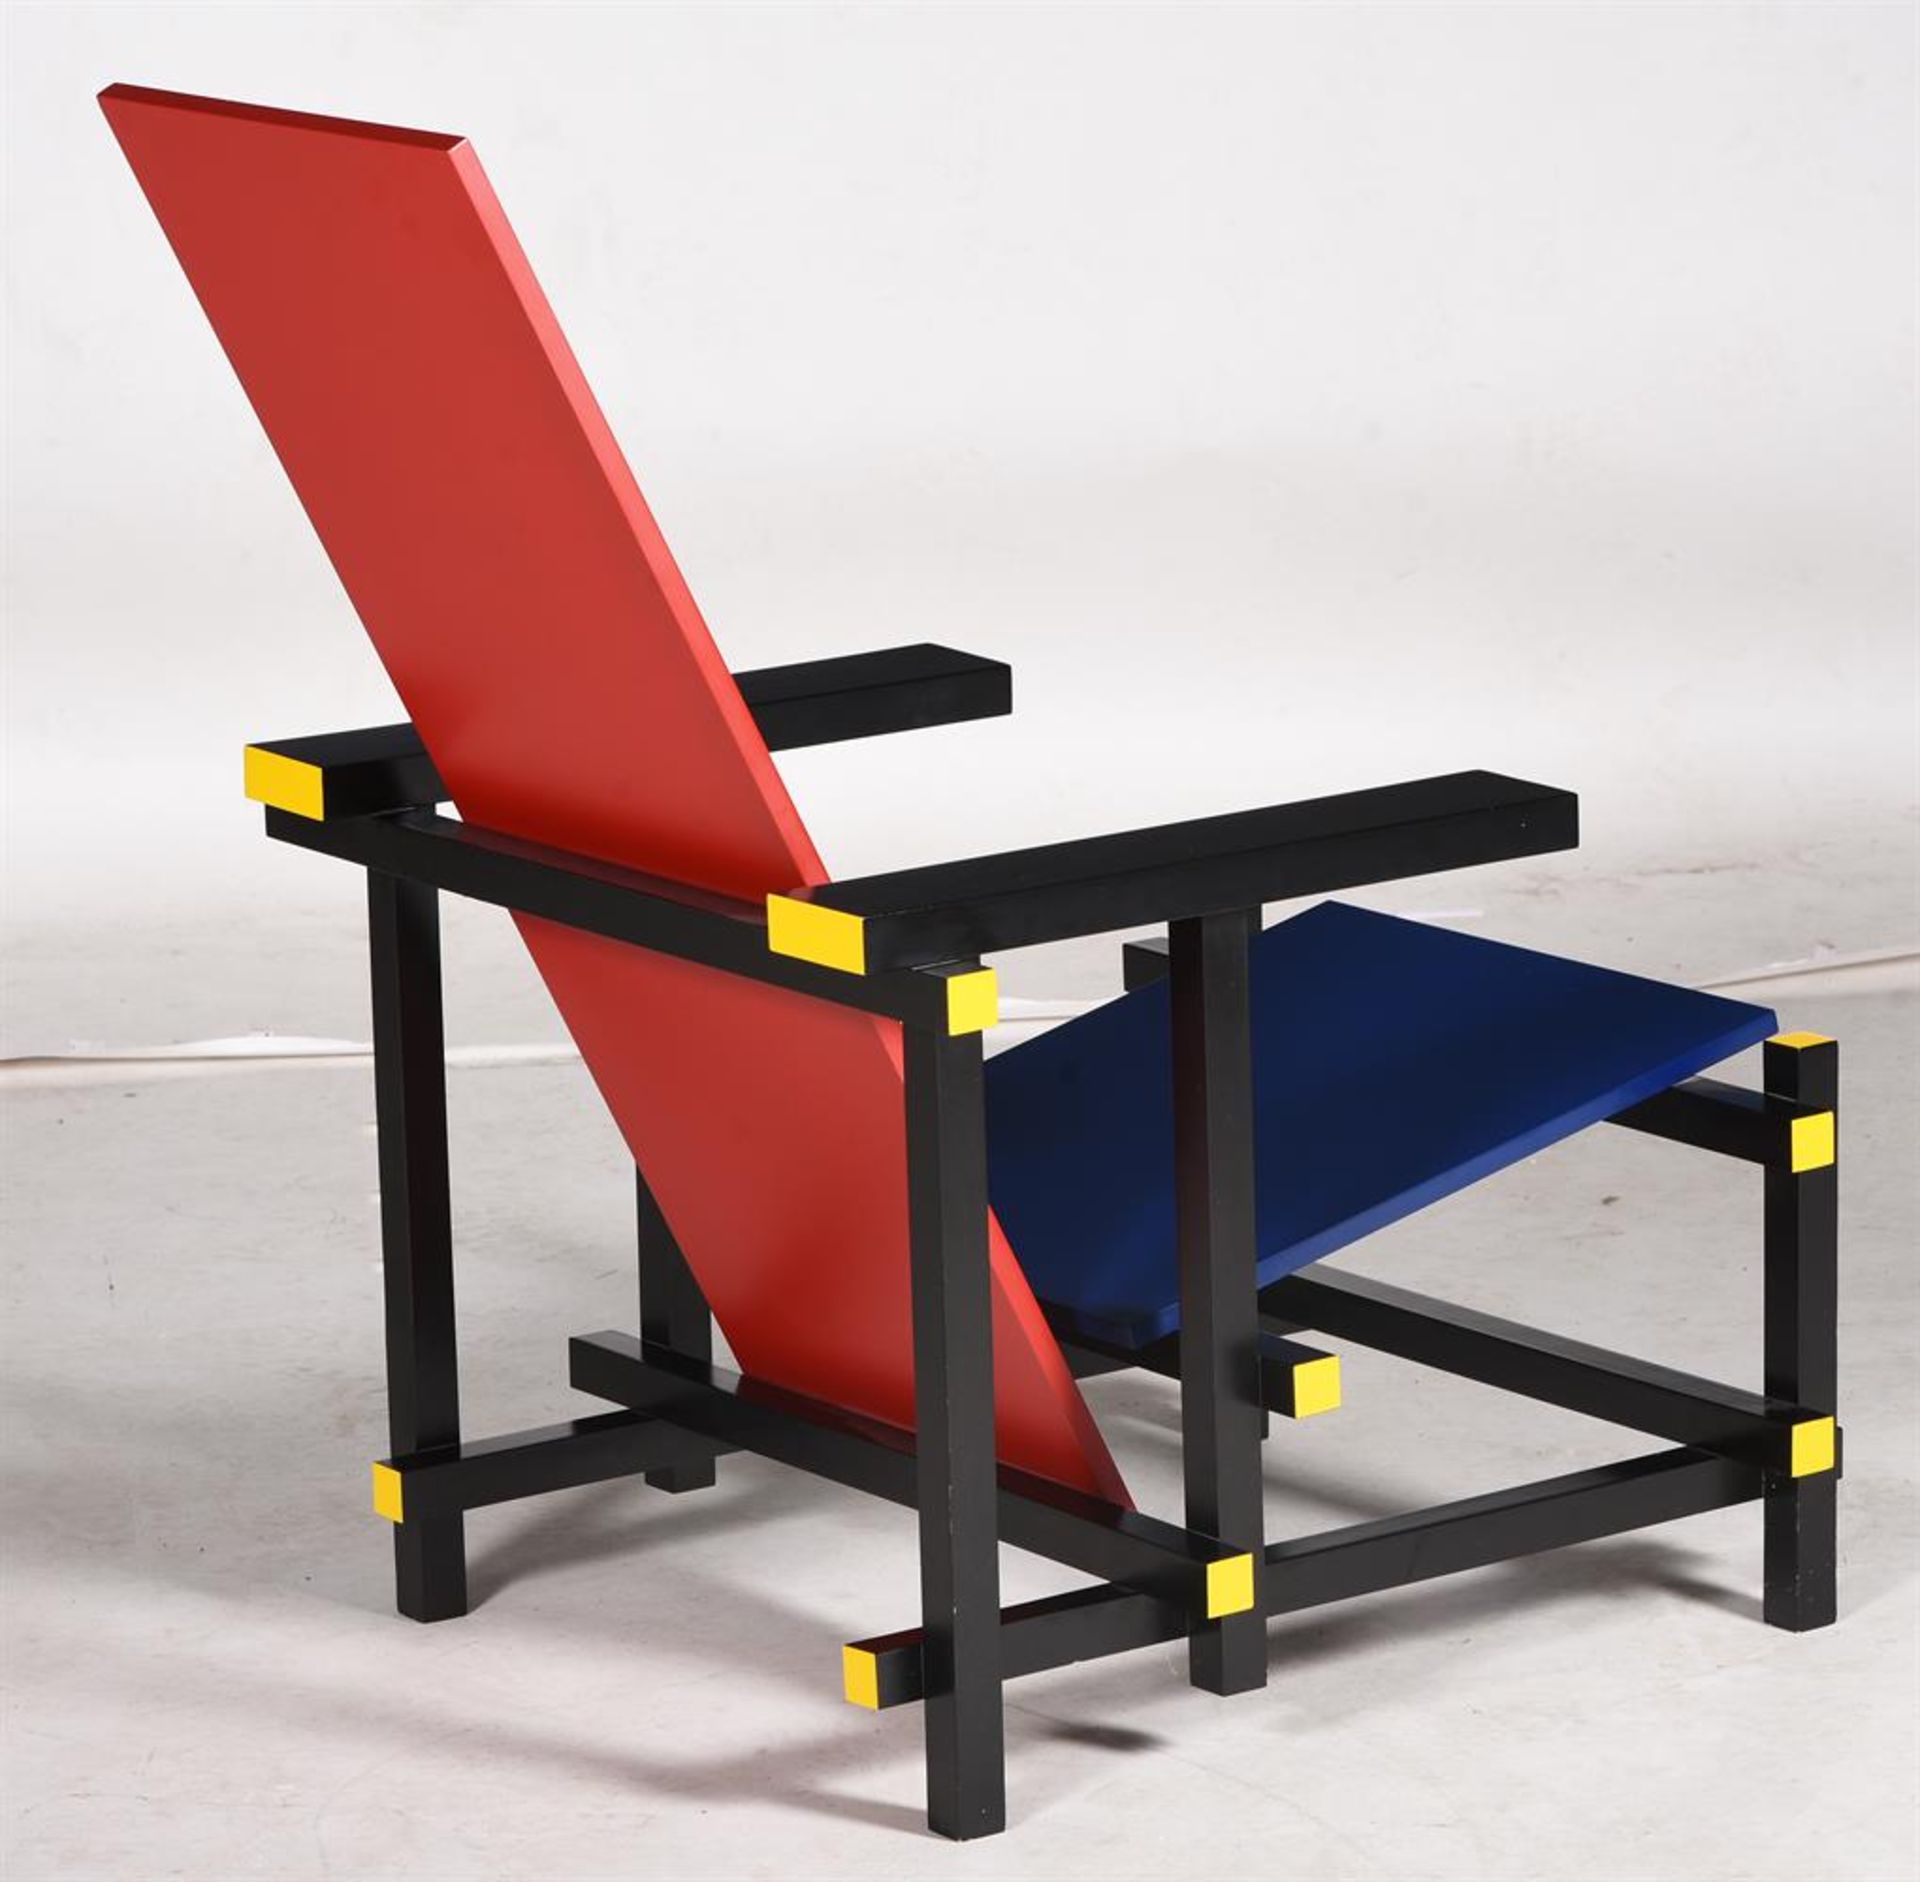 A 'RED & BLUE' CHAIR DESIGNED BY GERRIT REITVELD - Image 3 of 4